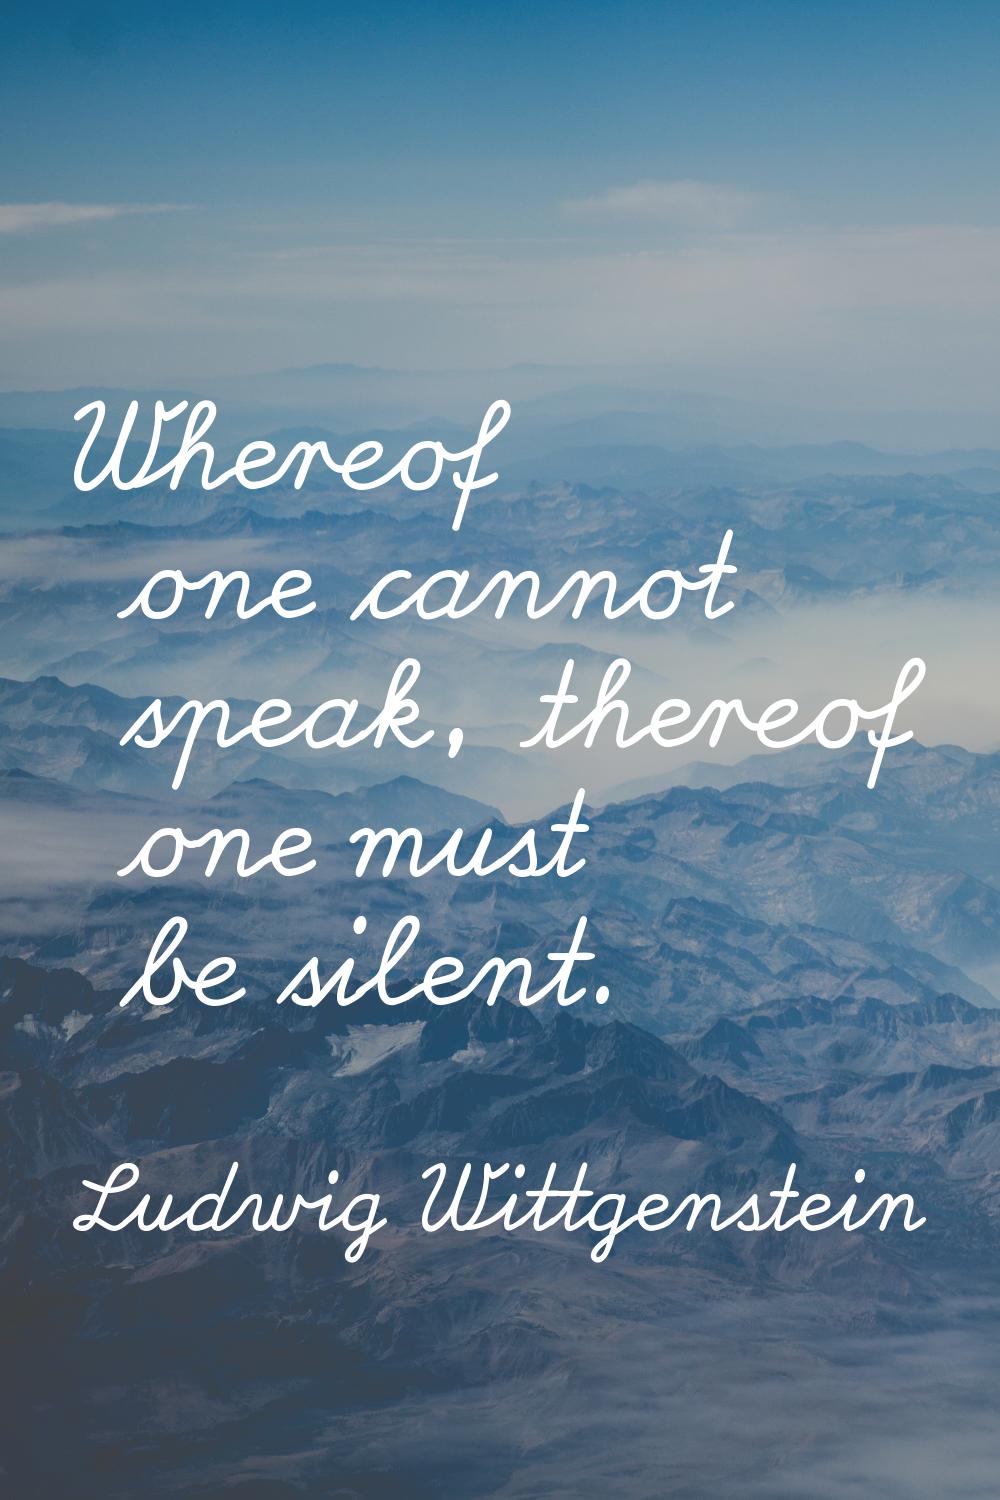 Whereof one cannot speak, thereof one must be silent.